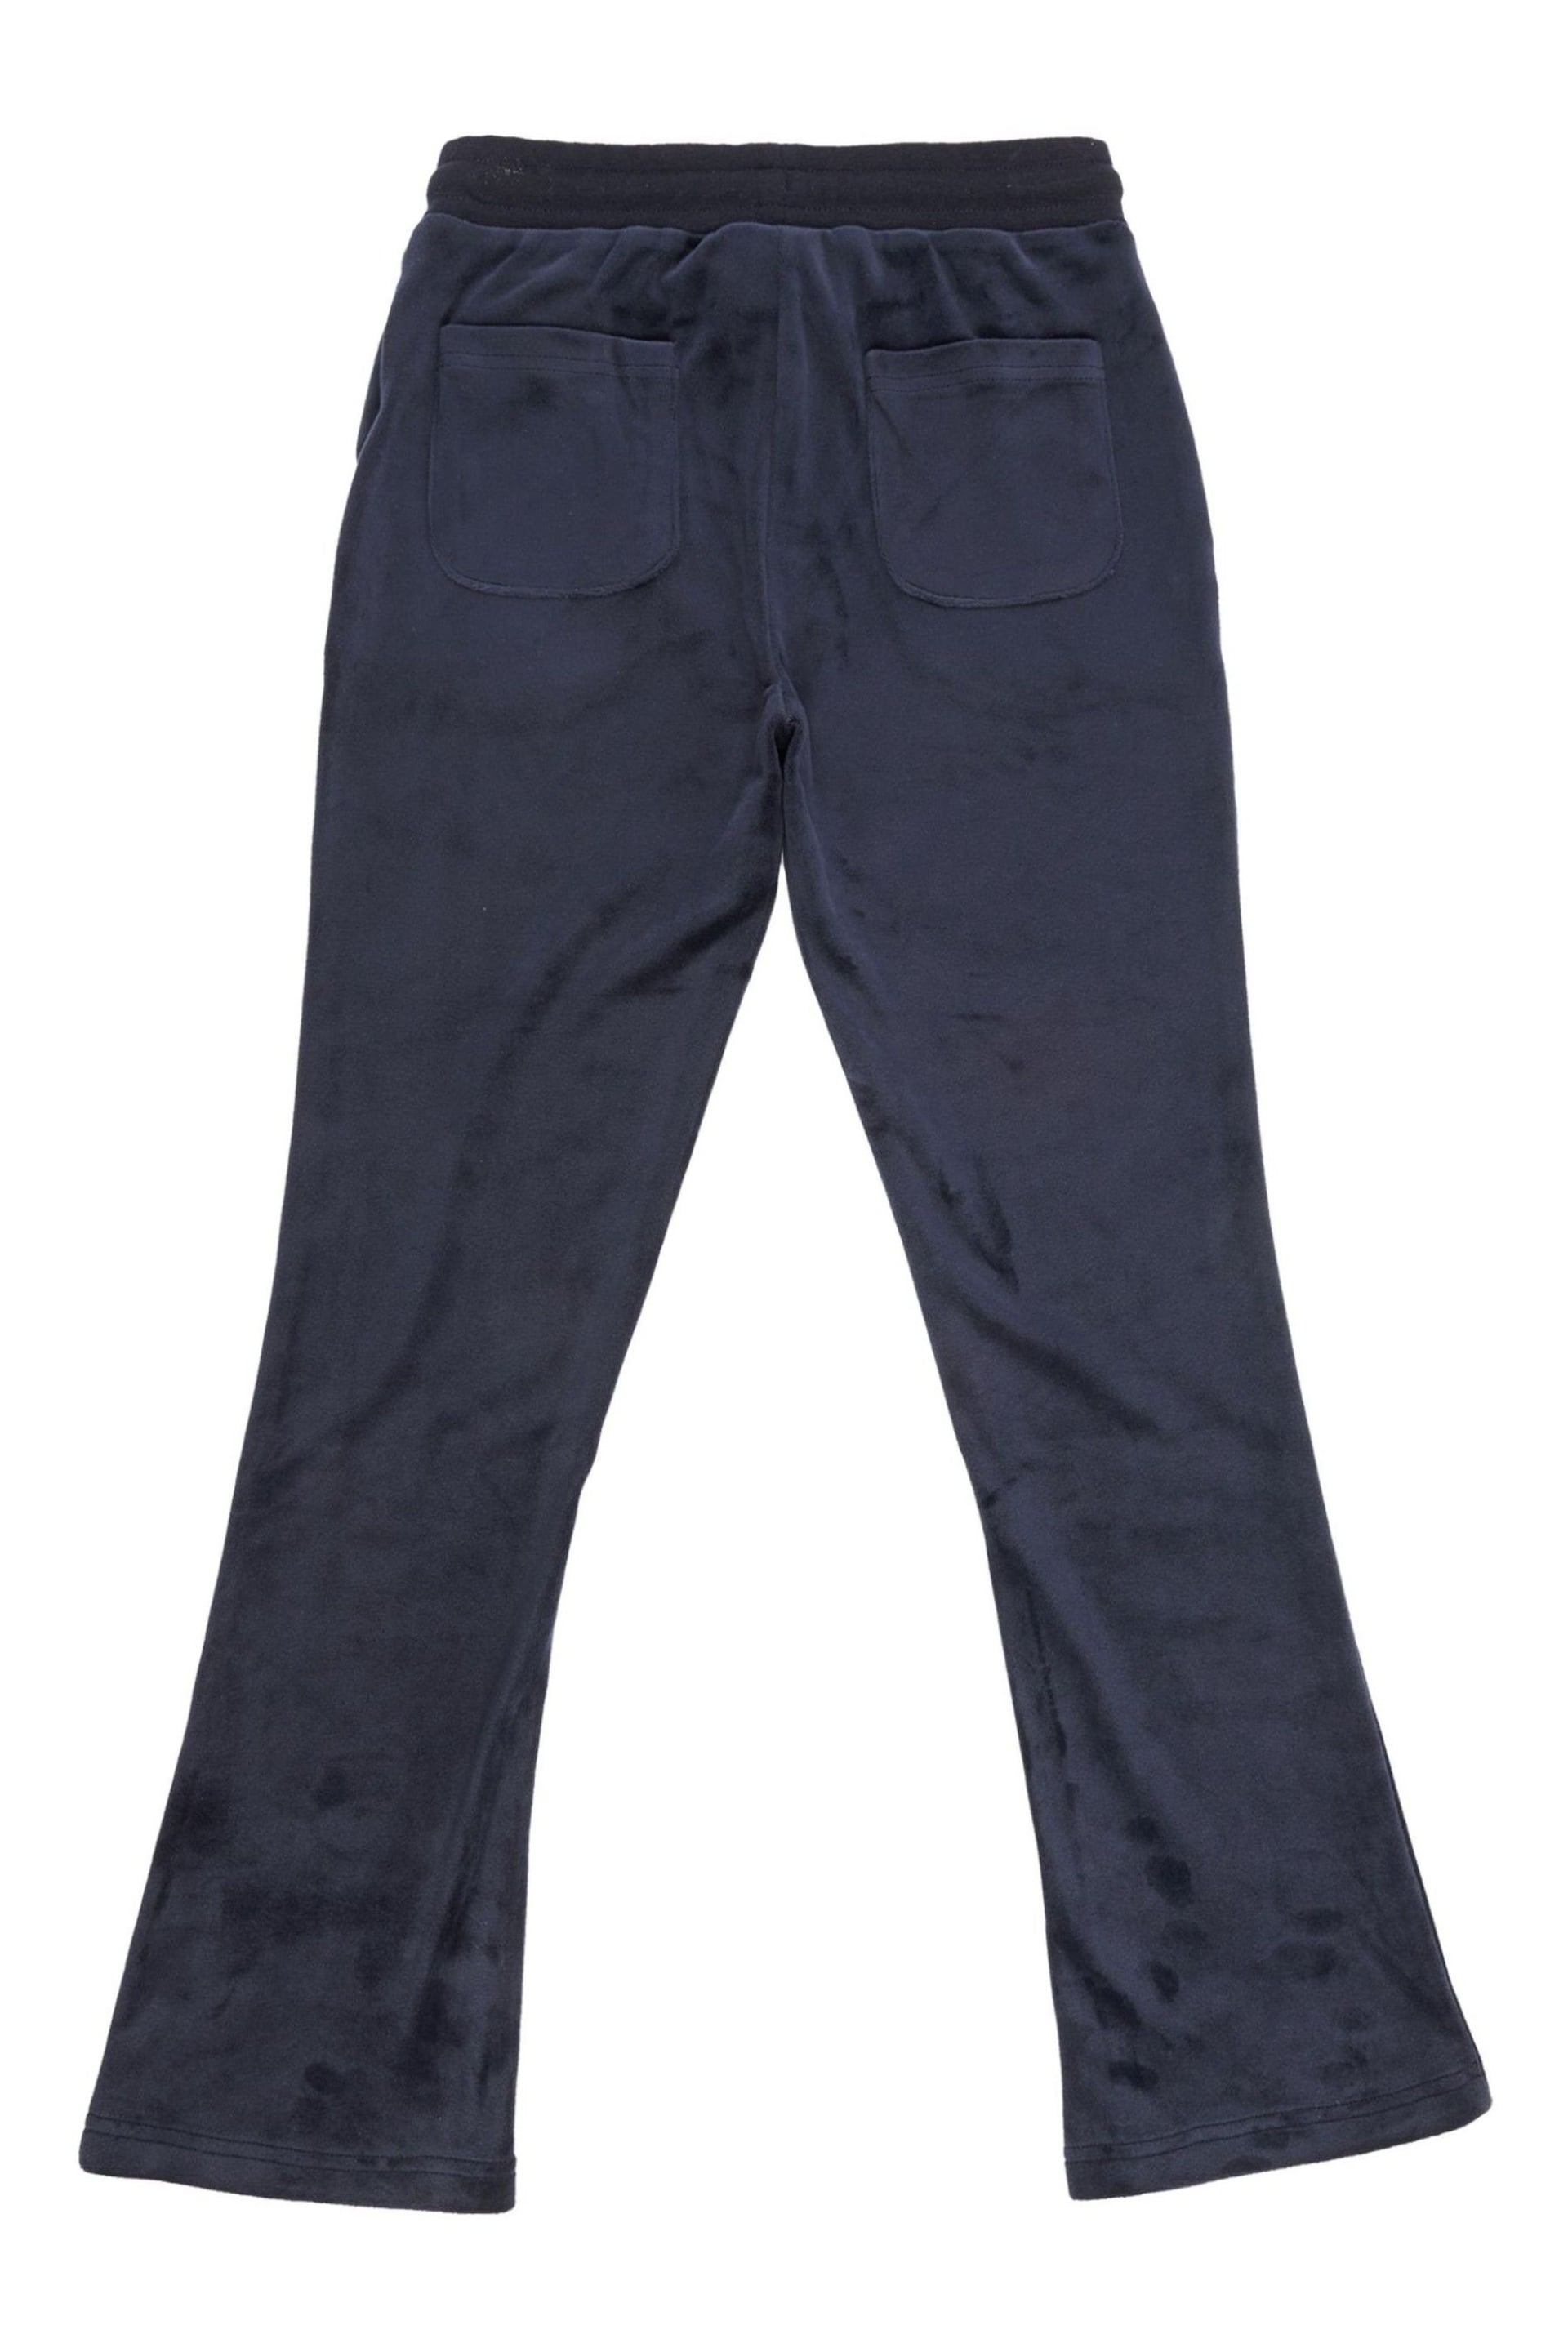 Juicy Couture Diamante Velour Bootcut Joggers - Image 2 of 3